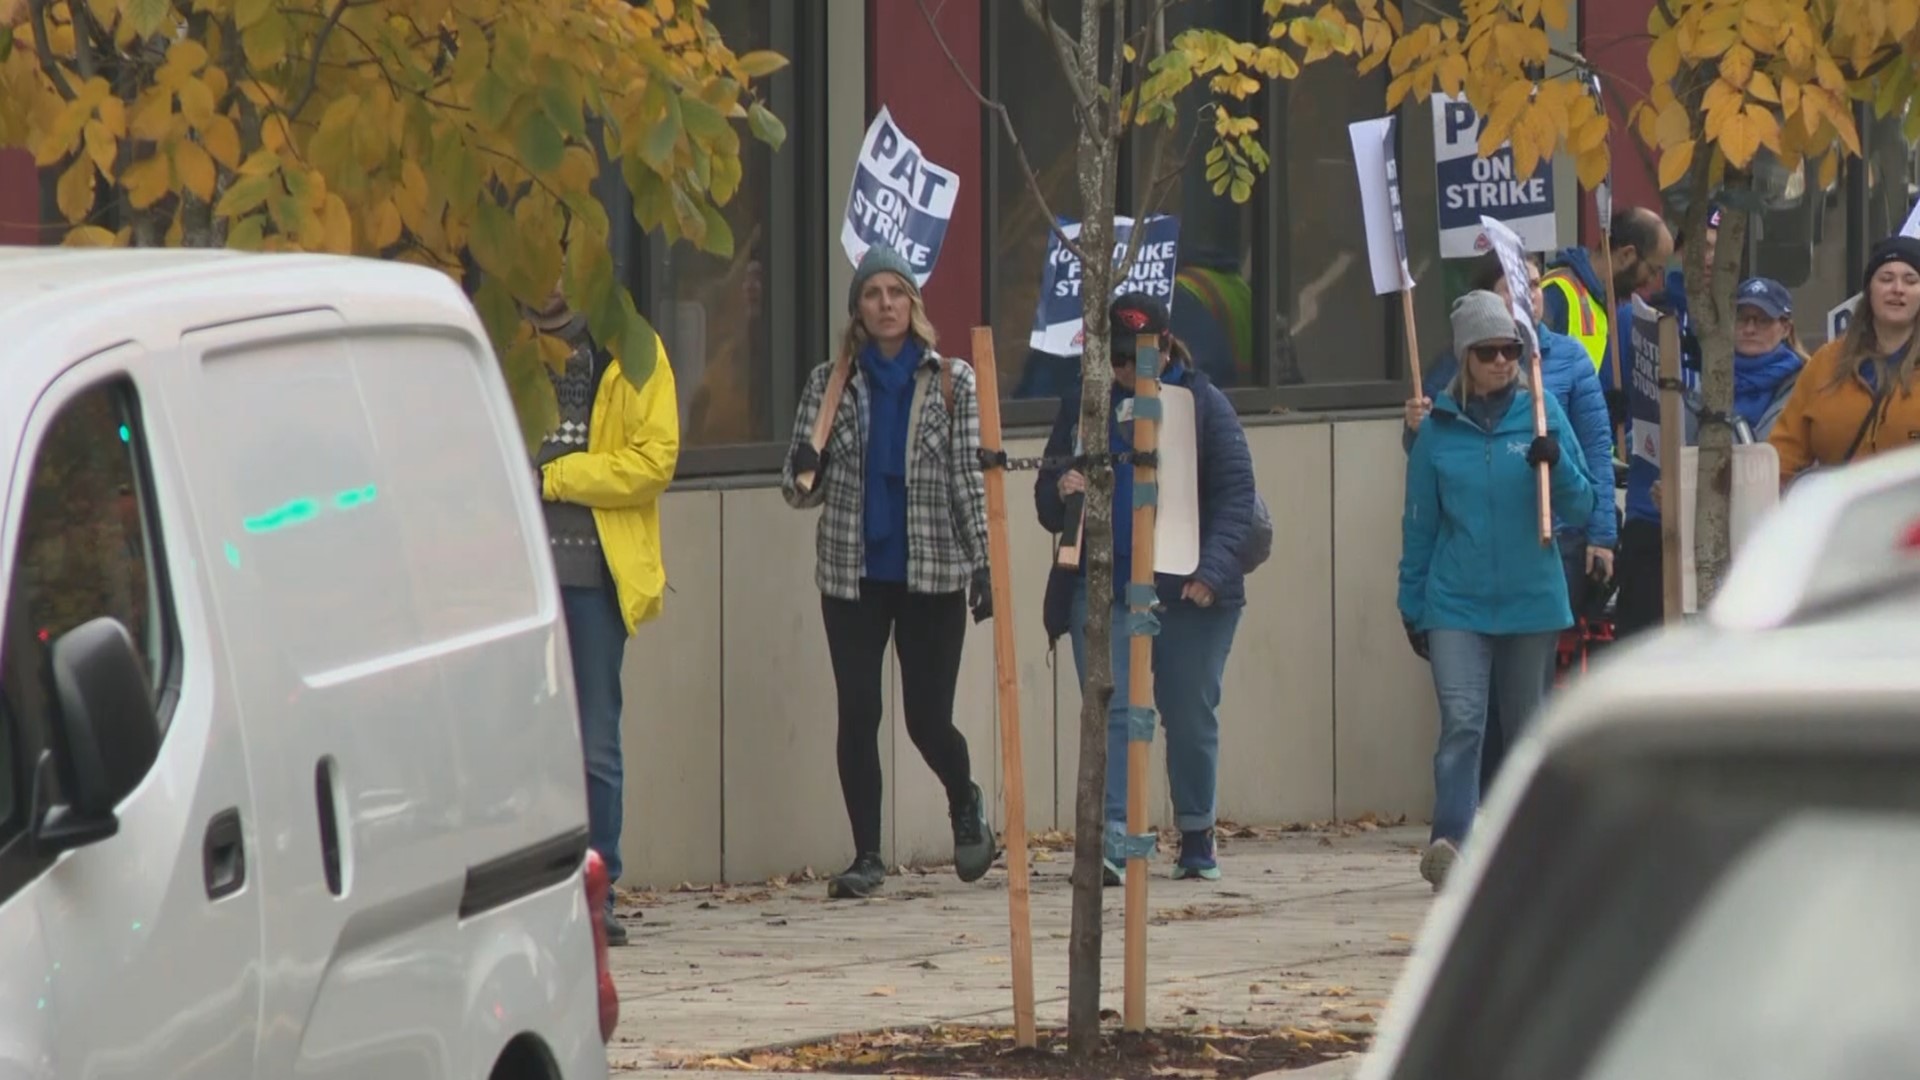 Portland Public Schools have been closed since Wednesday, when the historic teachers strike began. Parents and kids alike are eager for classes to resume.